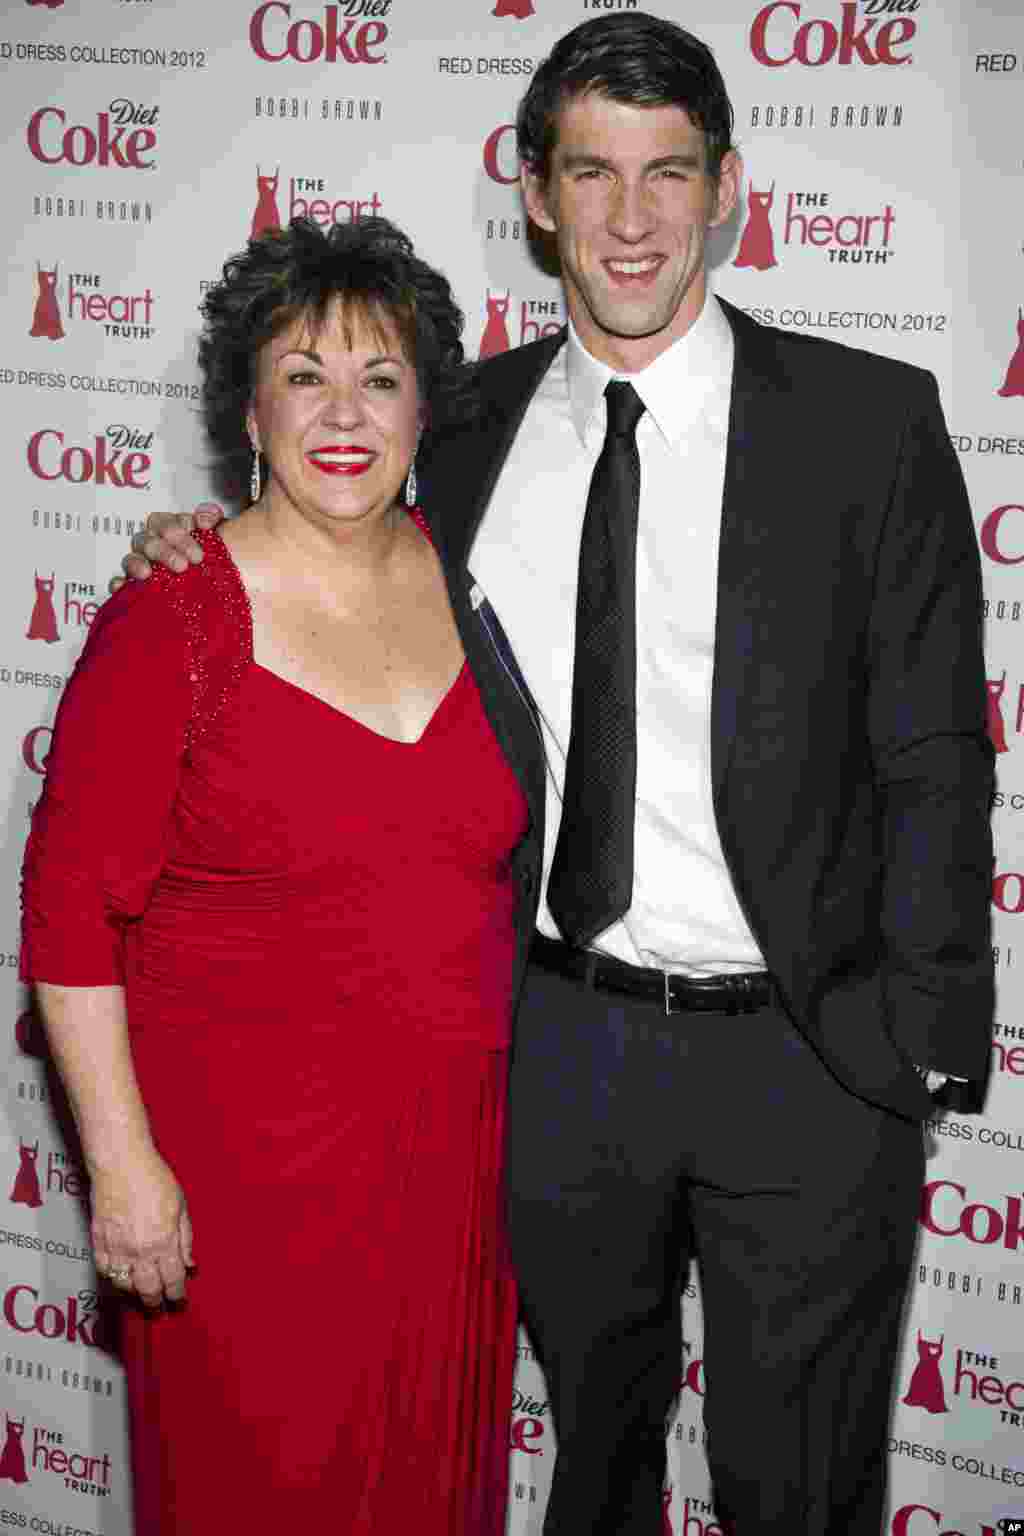 Michael Phelps and his mother Debbie Phelps attend the Heart Truth's Red Dress Collection during Fashion Week in New York, February 8, 2012.